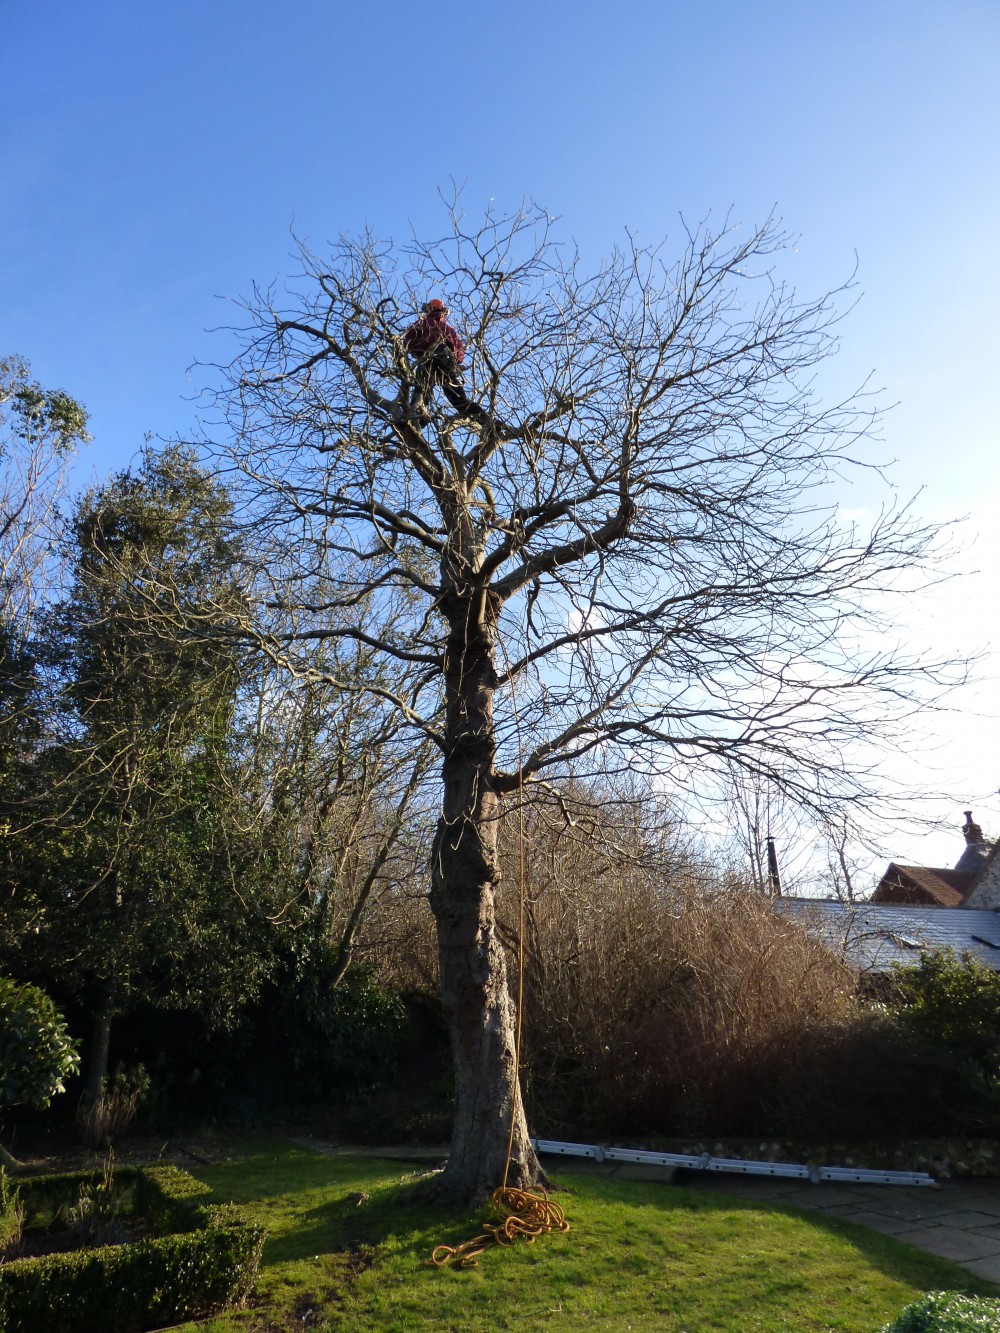 Avon Tree and Garden Services provide a tree surgeon services throughout Wiltshire